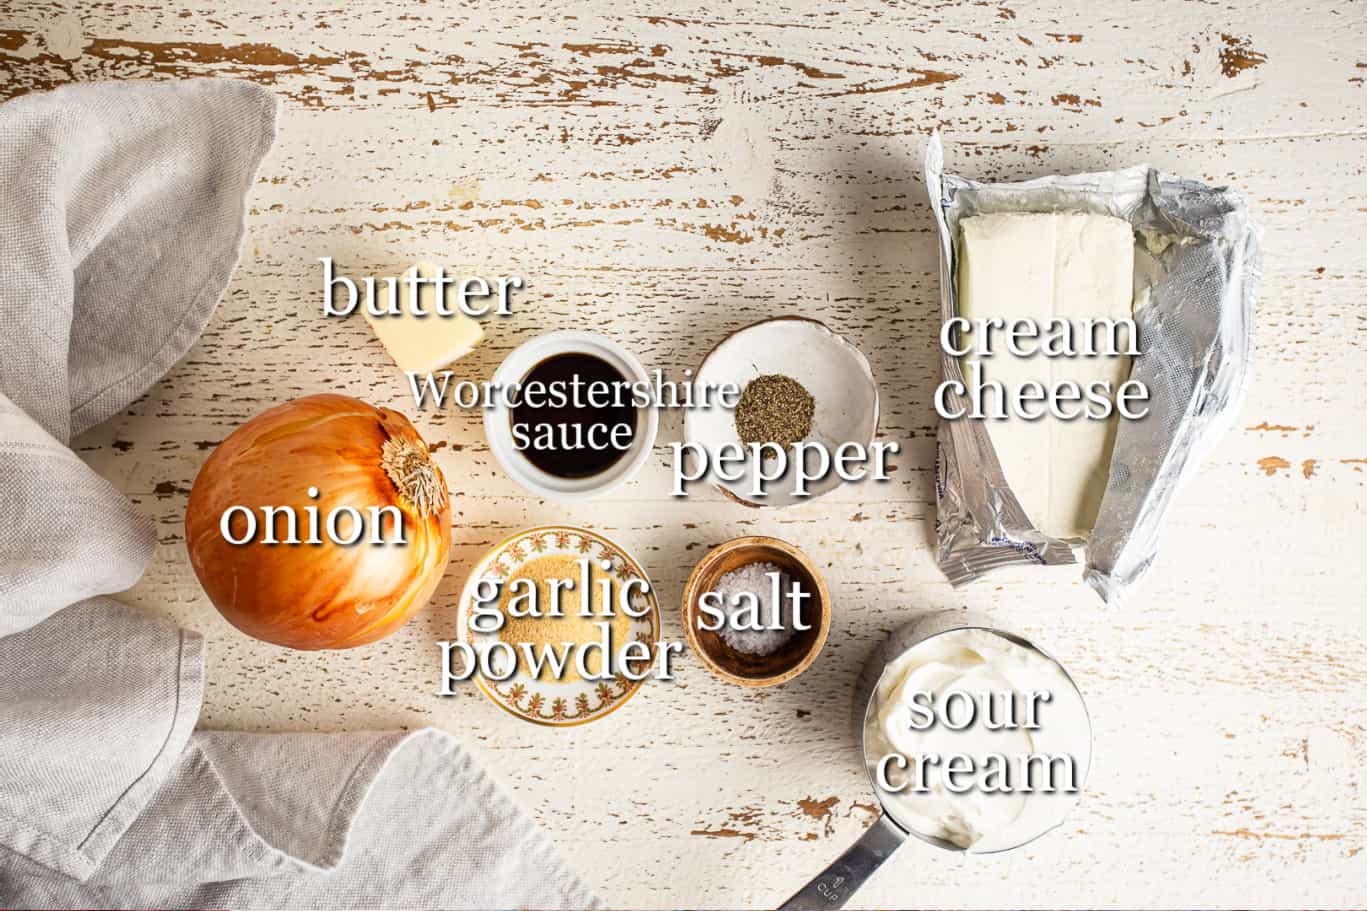 Ingredients for making French onion dip, with text labels.